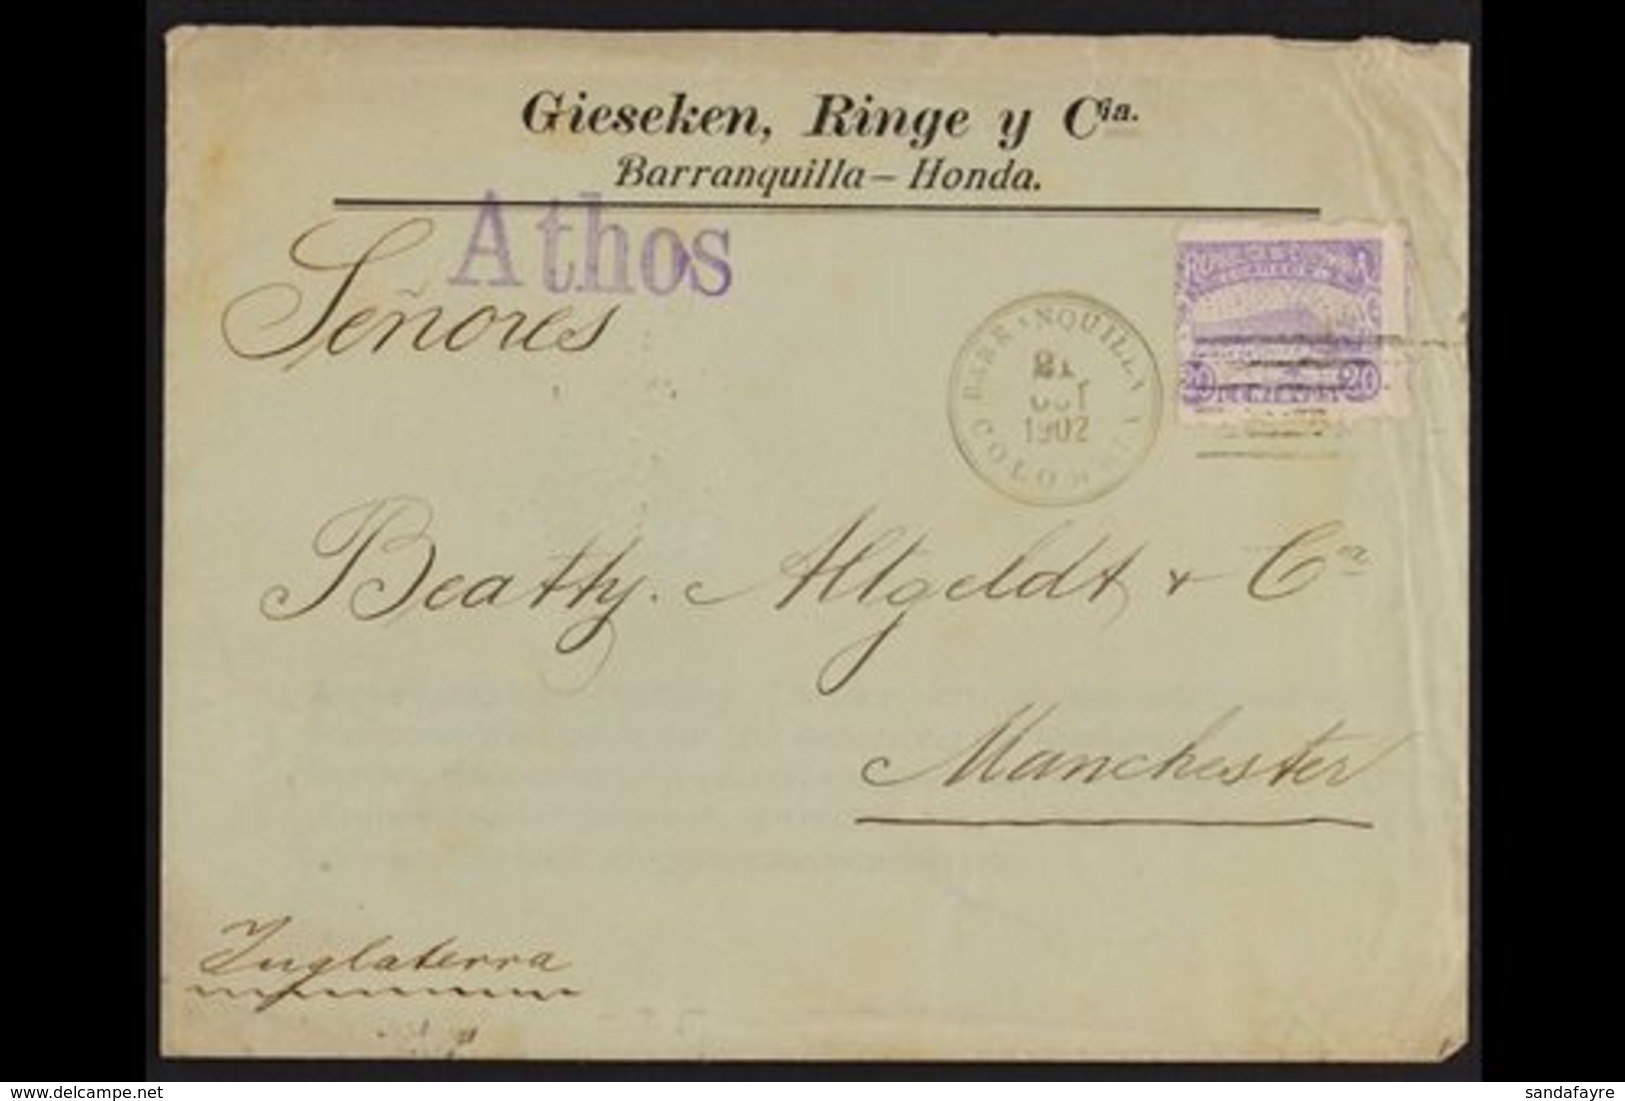 1902 S.S. "ATHOS" SHIP COVER. 1902 (Oct) Cover Addressed To Manchester, England, Bearing 20c Stamp Tied By "Barranquilla - Colombia